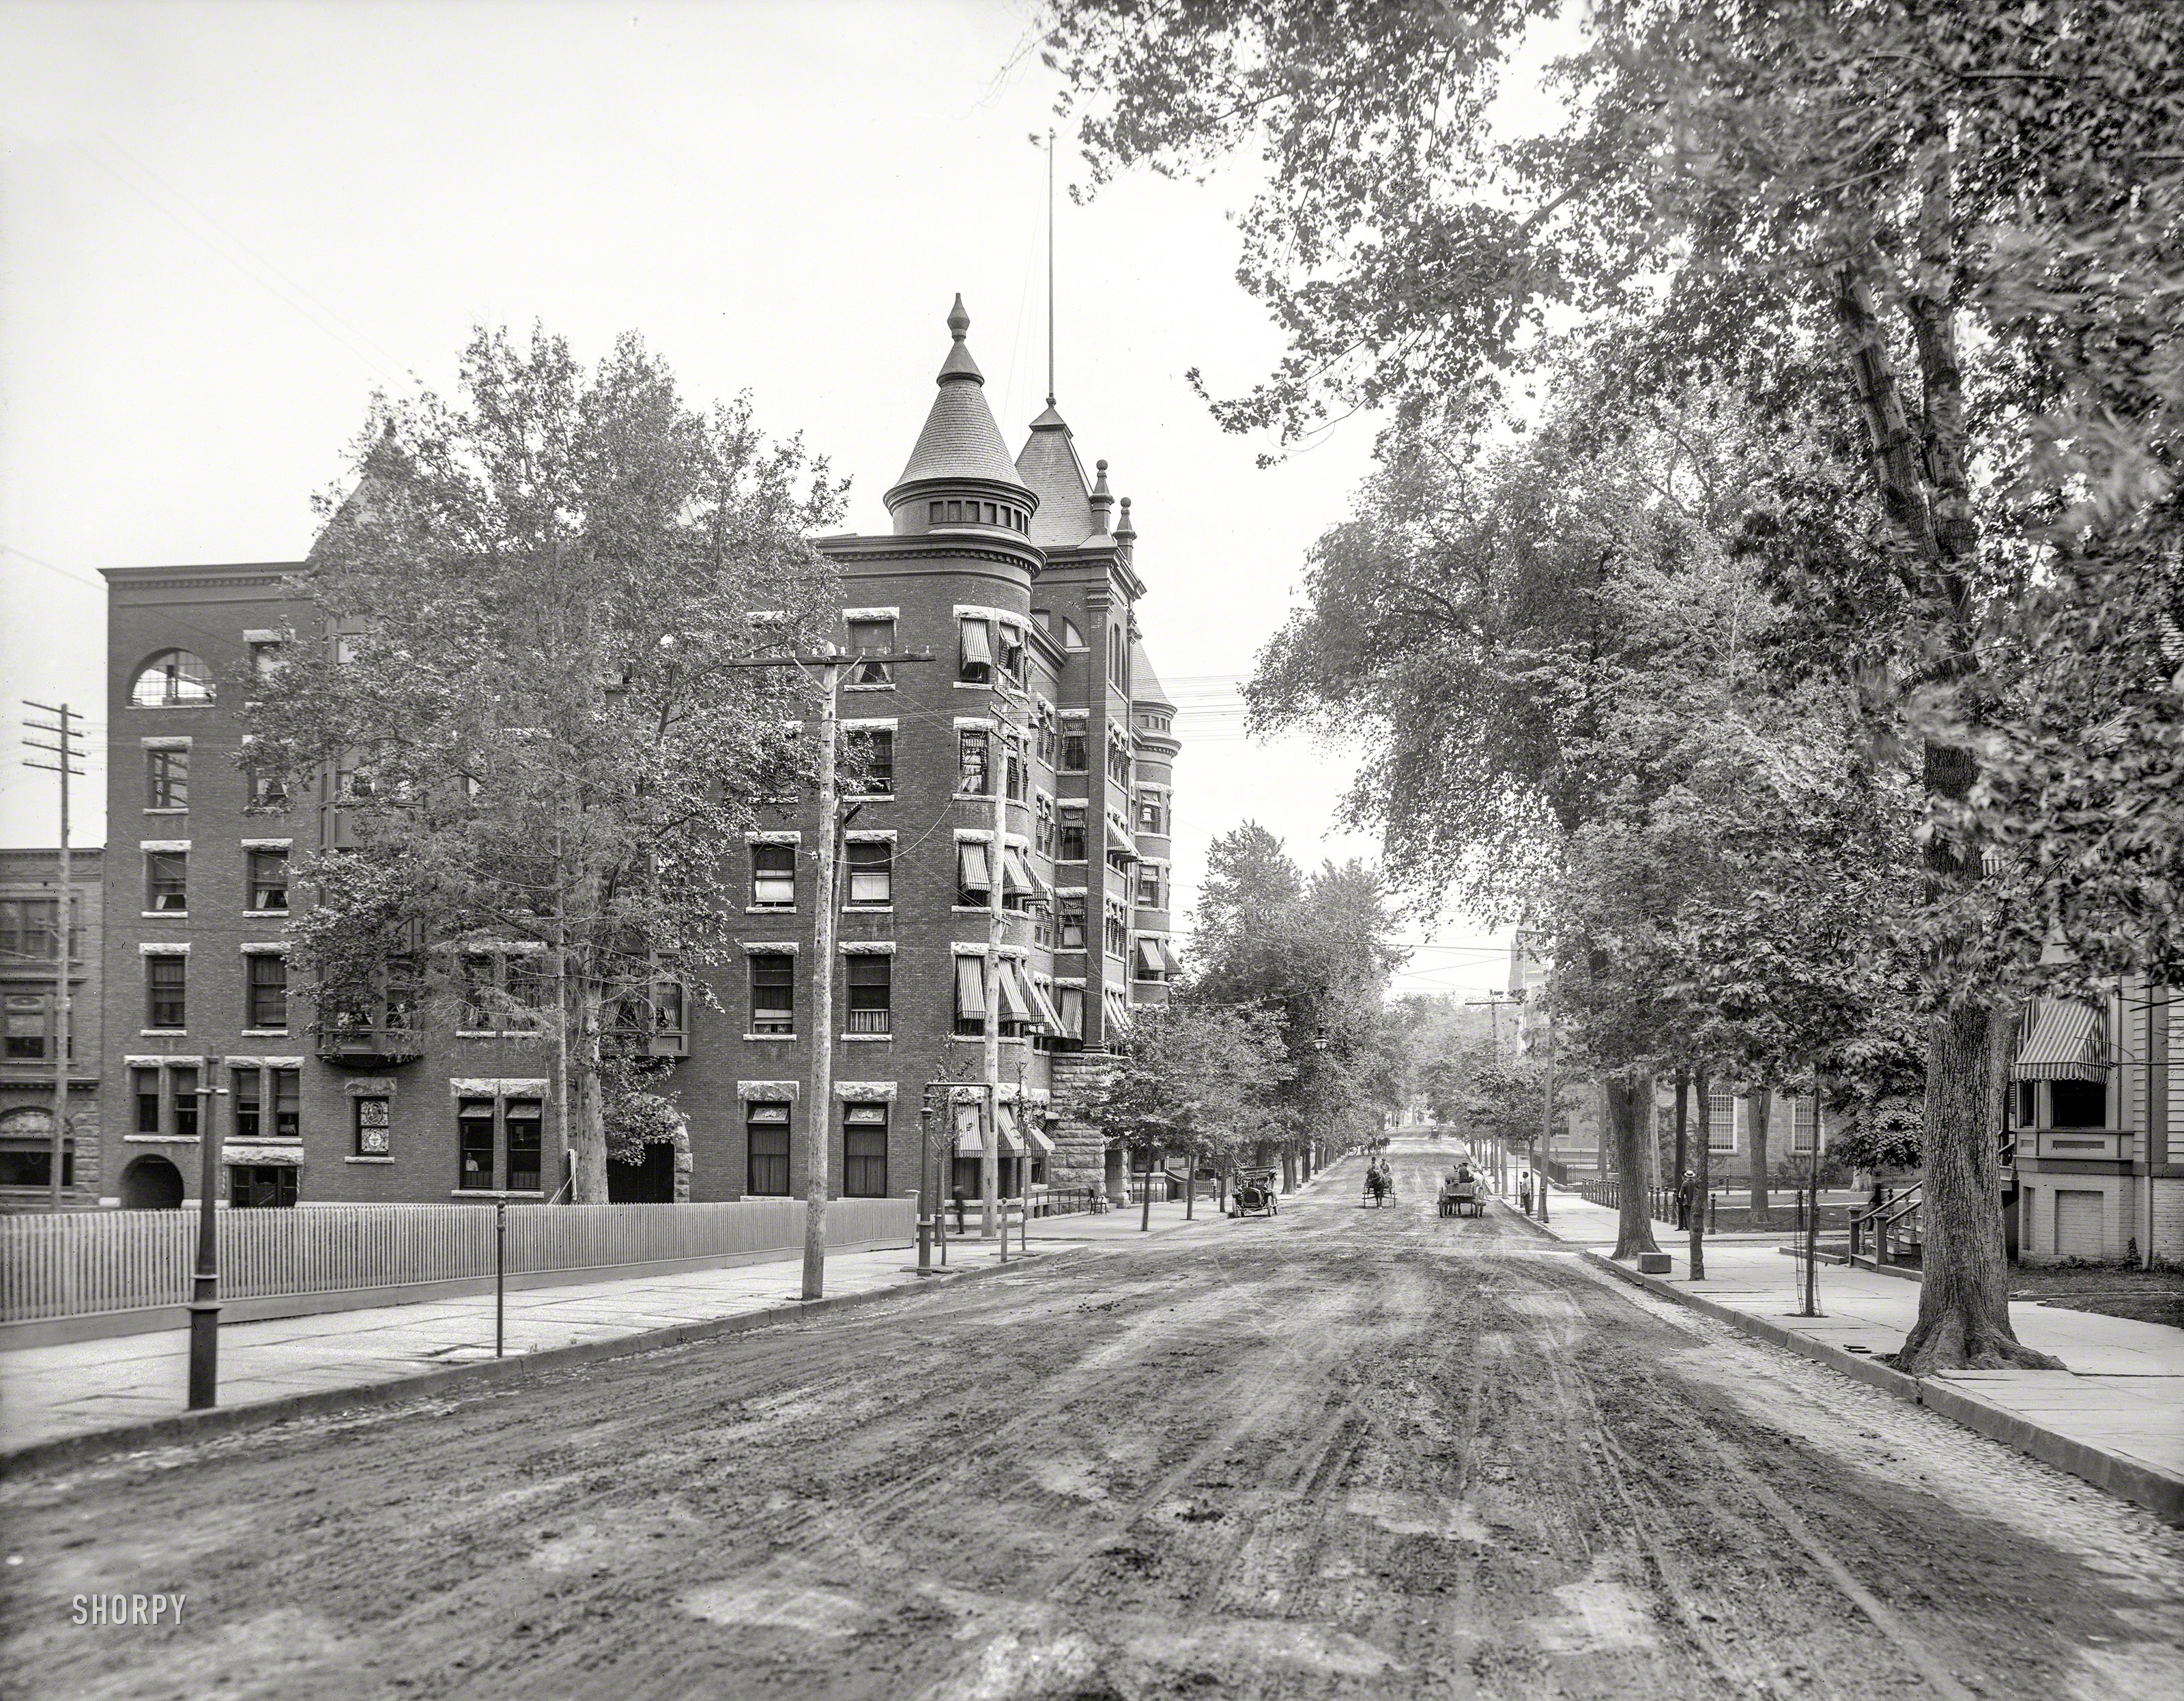 Newburgh, New York, circa 1906. "Palatine Hotel and Grant Street." 8x10 inch dry plate glass negative, Detroit Publishing Company. View full size.